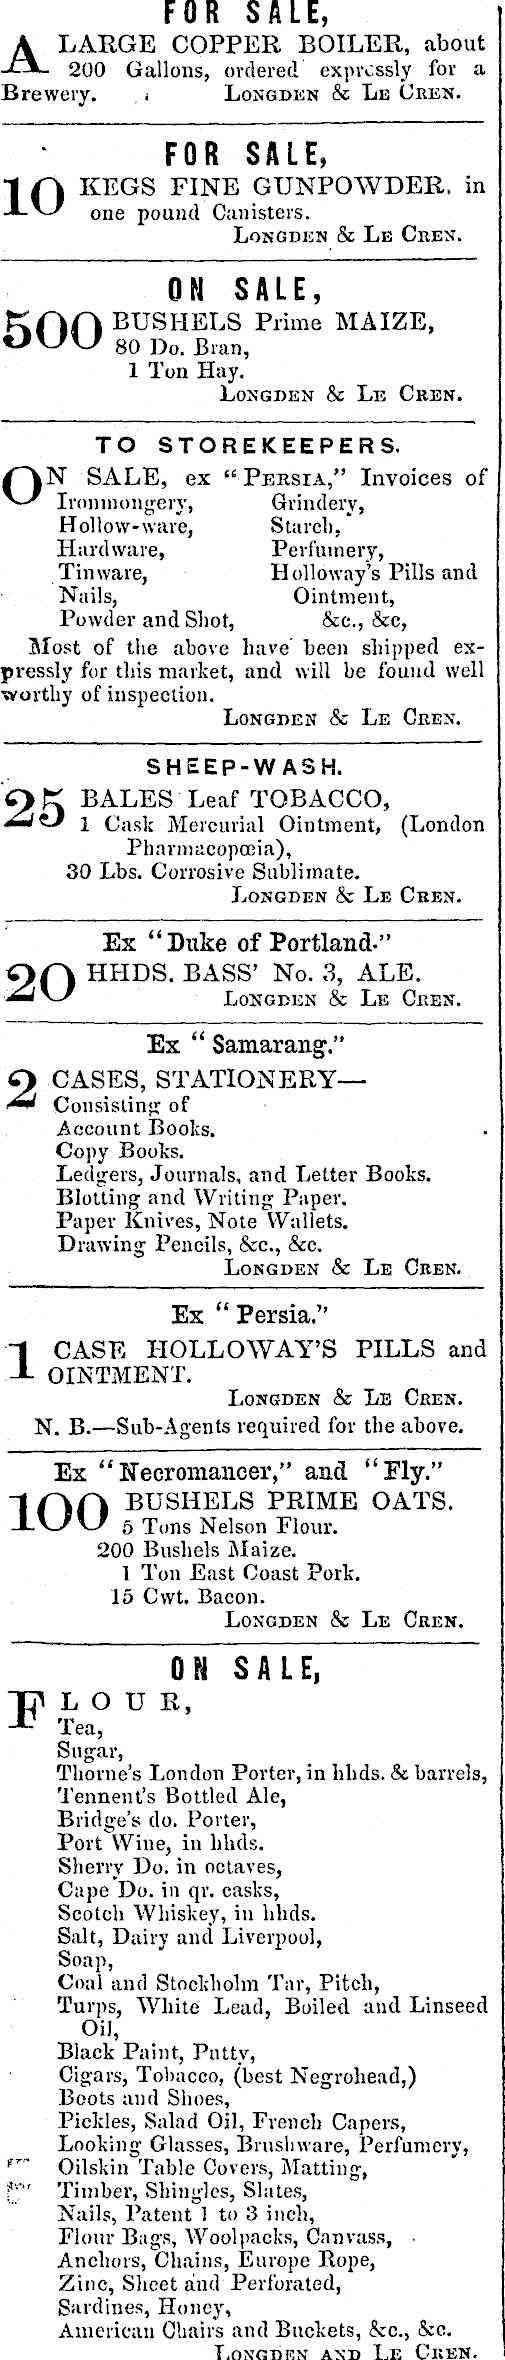 Papers Past Newspapers Lyttelton Times 6 November 1852 Page 3 Advertisements Column 1